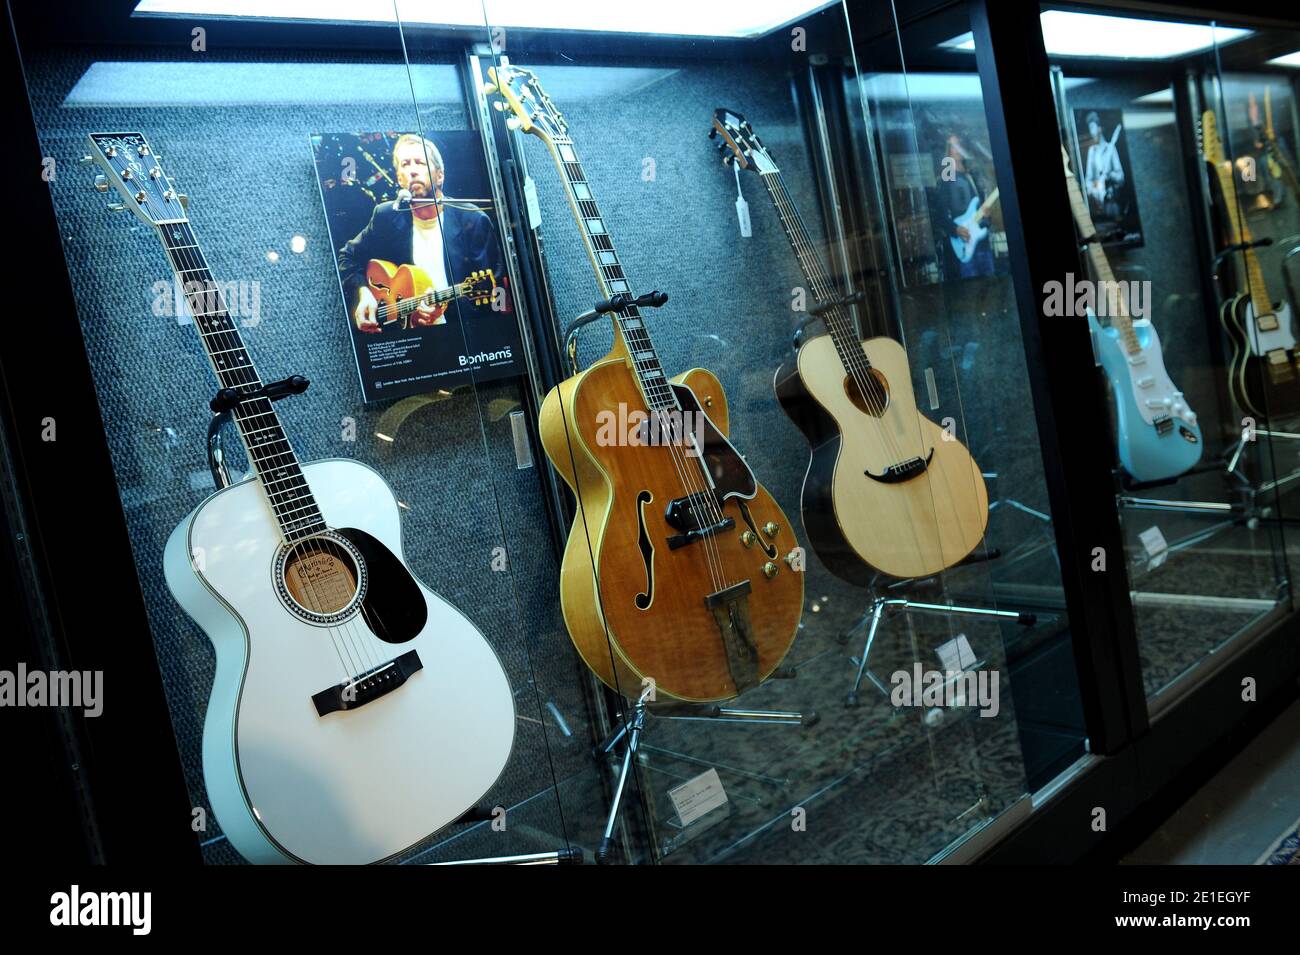 Auction of Eric Clapton's guitars and amps to benefit the Crossroads  Center. Item 15 : A 2004 Martin 000-ECHF Bellezza Bianca Item 74 : A 1948  Gibson L-5P, $20,000/$30,000. Item 14 :